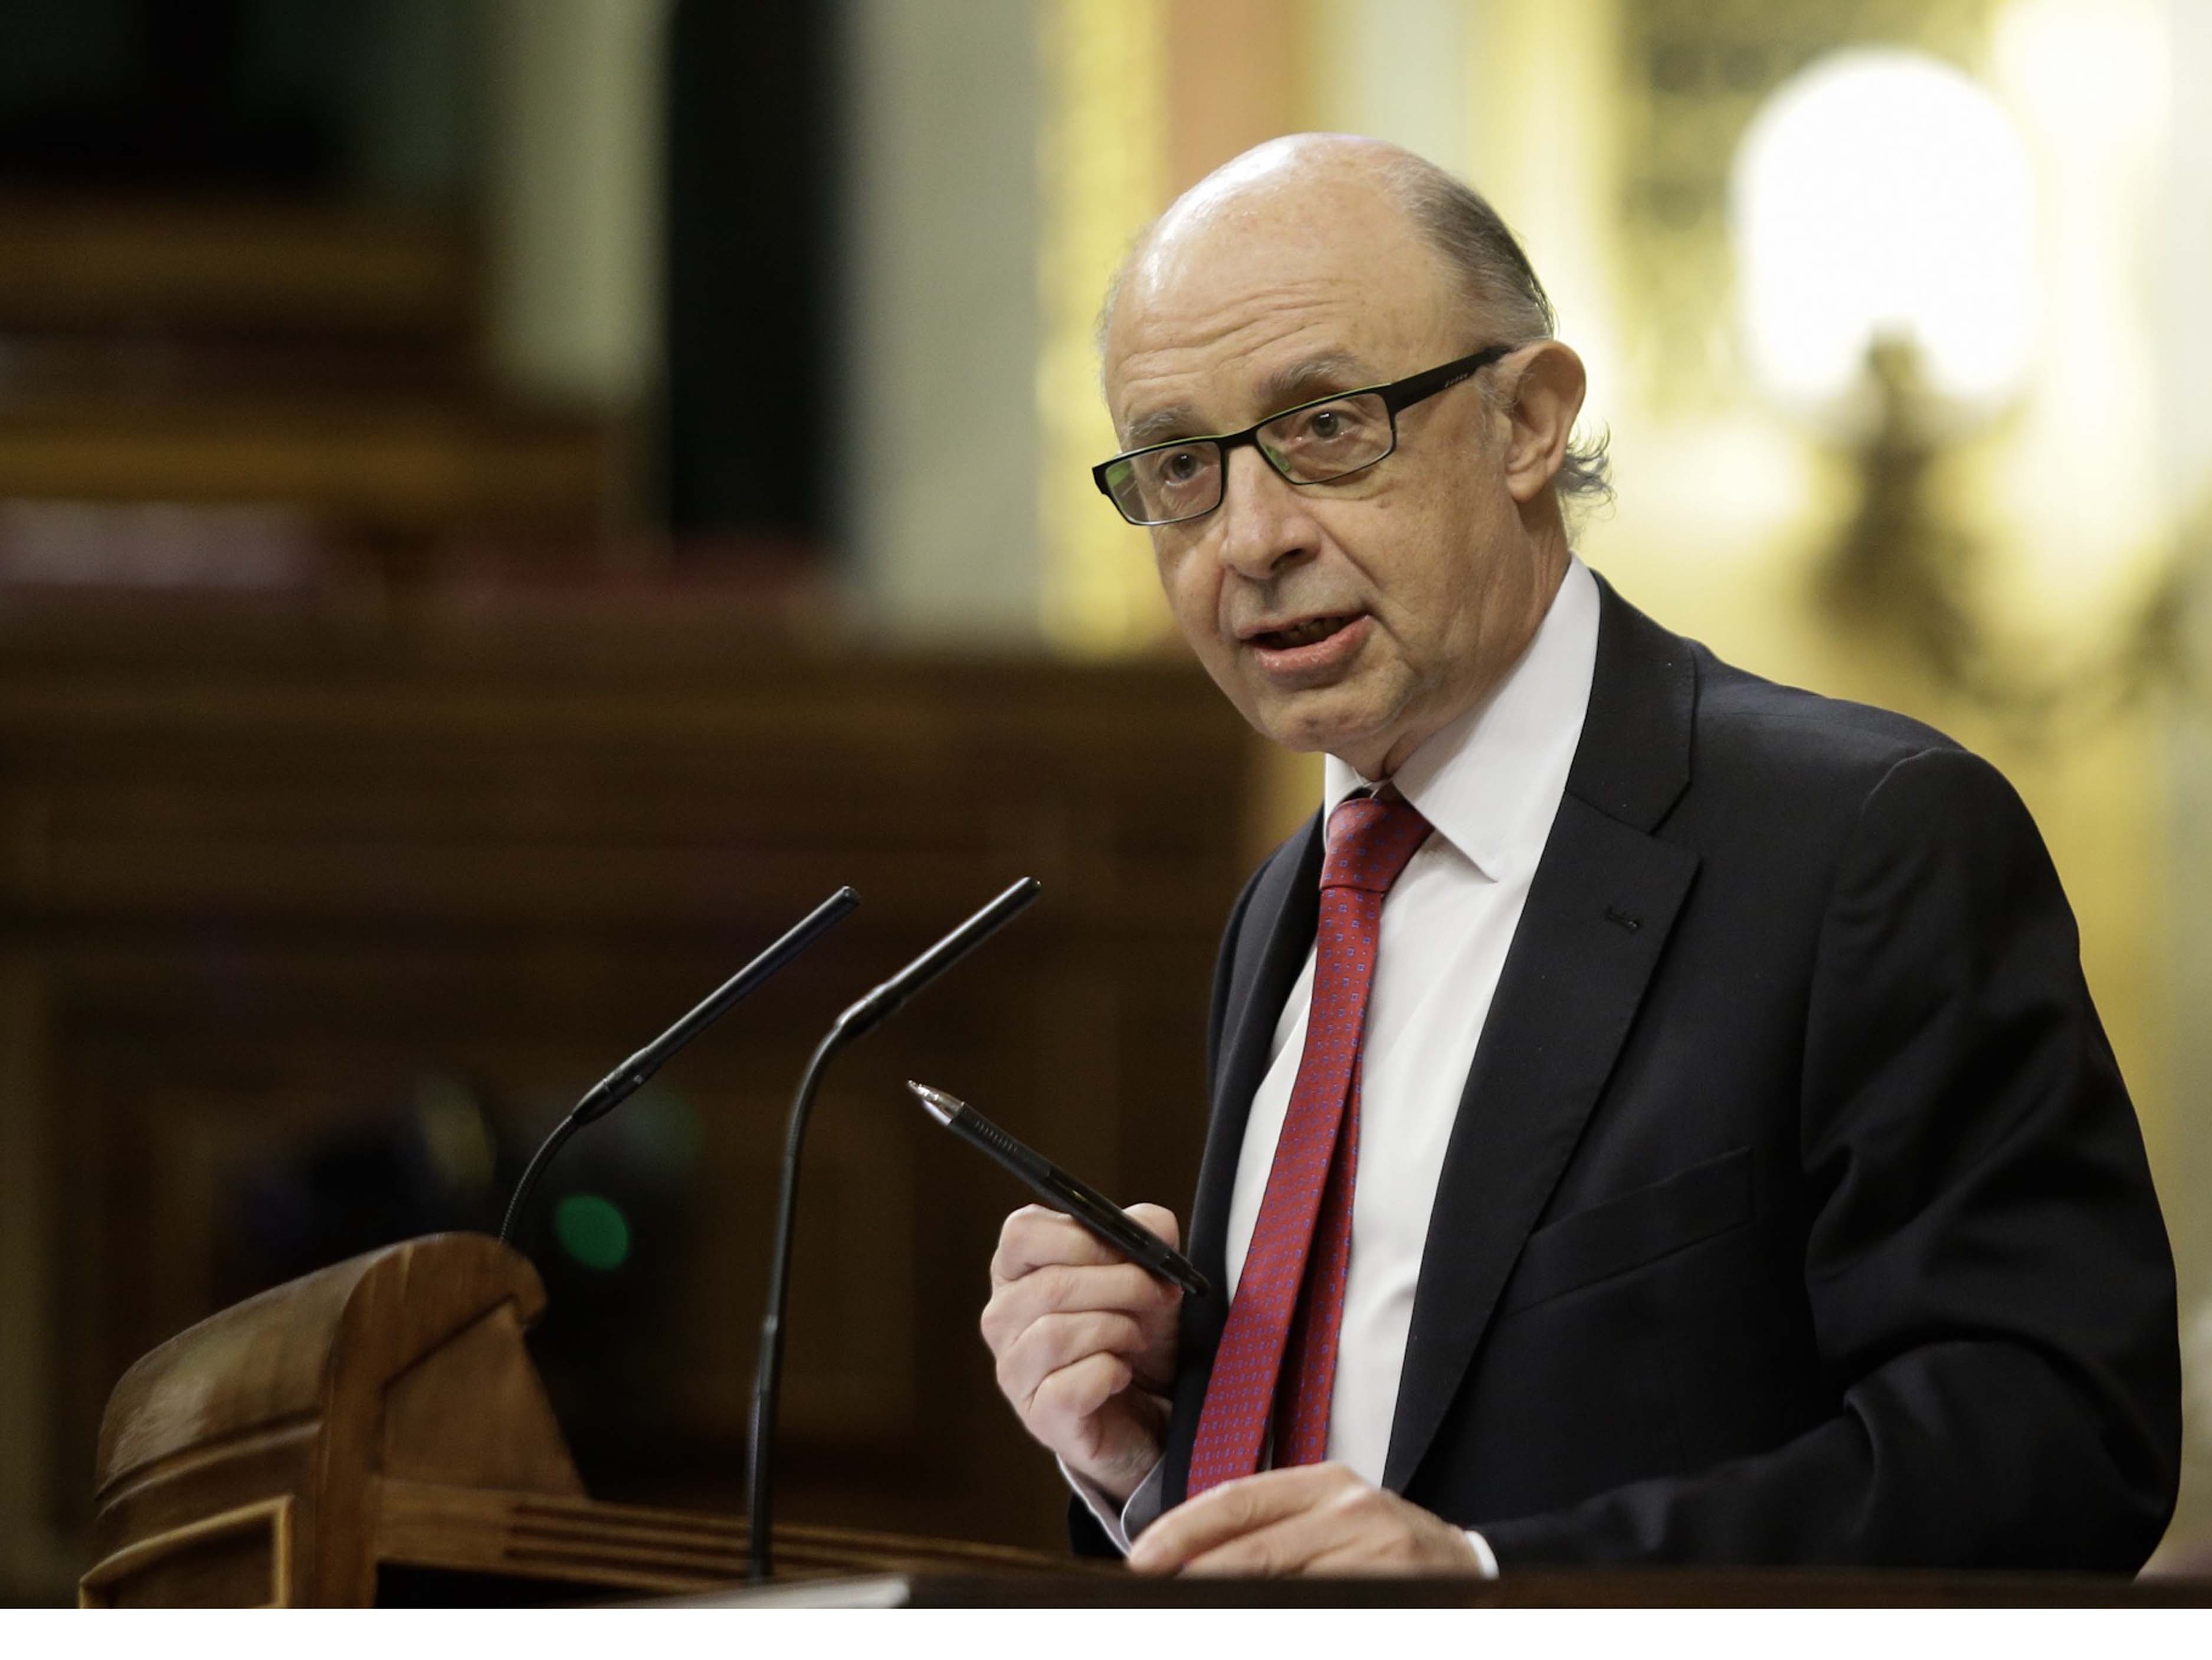 The Spanish minister of the treasury Cristóbal Montoro (by ACN)